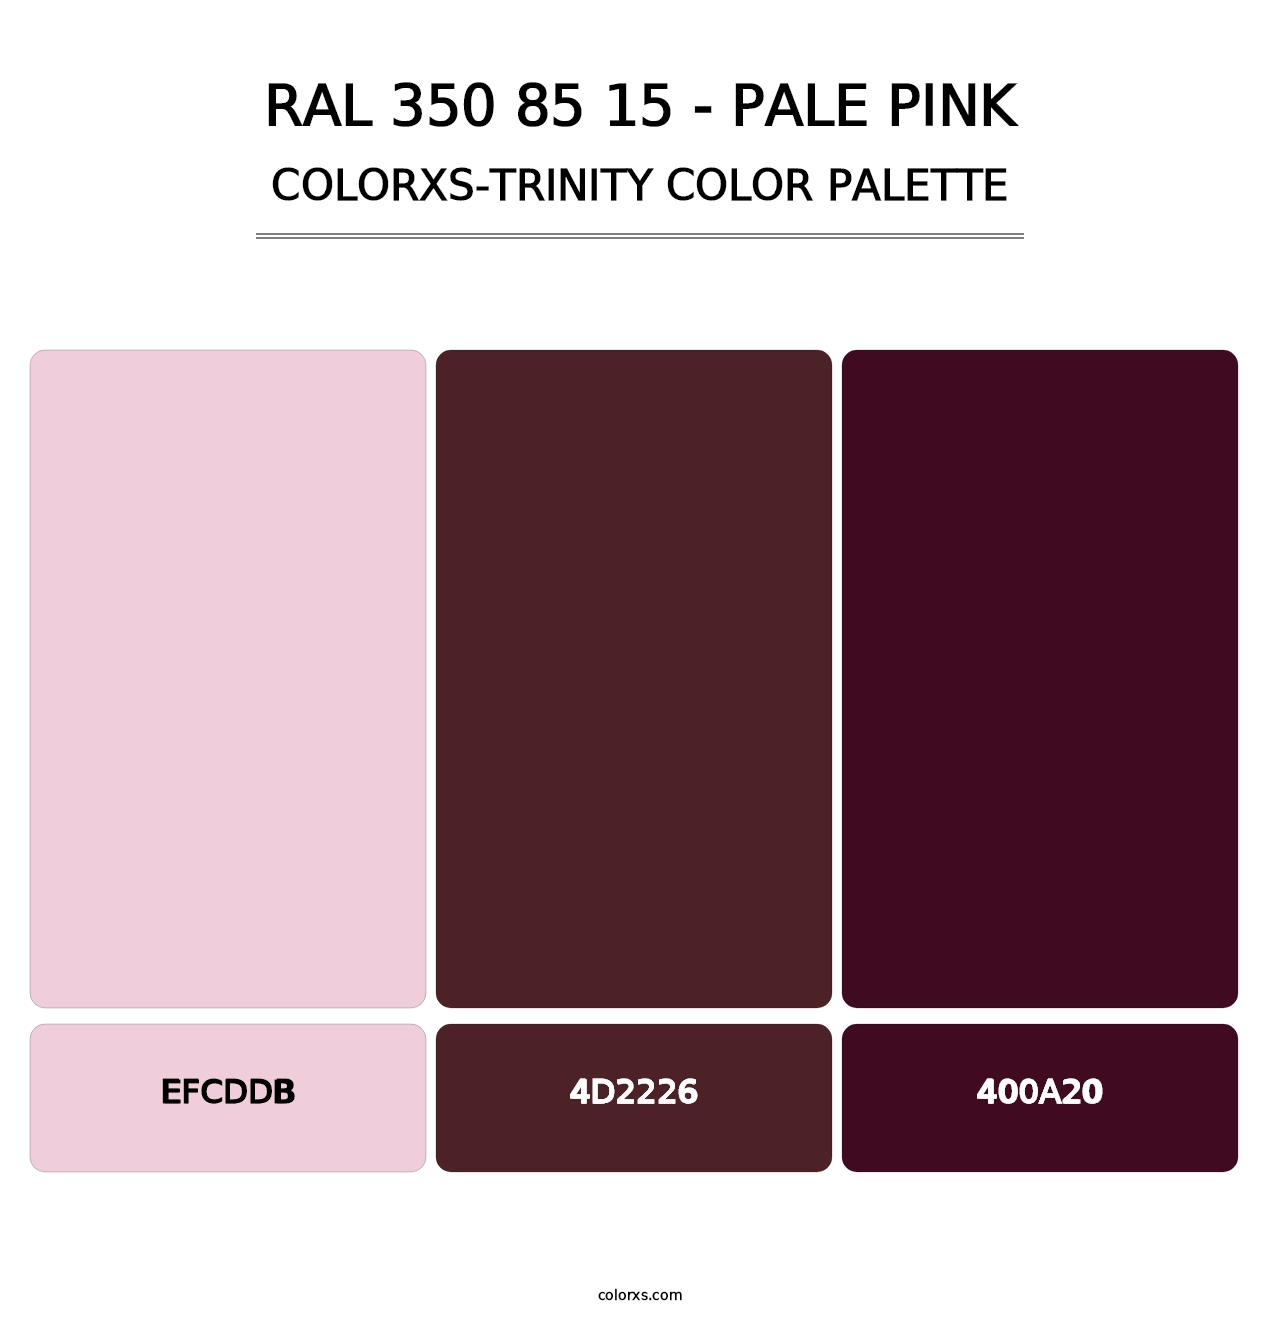 RAL 350 85 15 - Pale Pink - Colorxs Trinity Palette